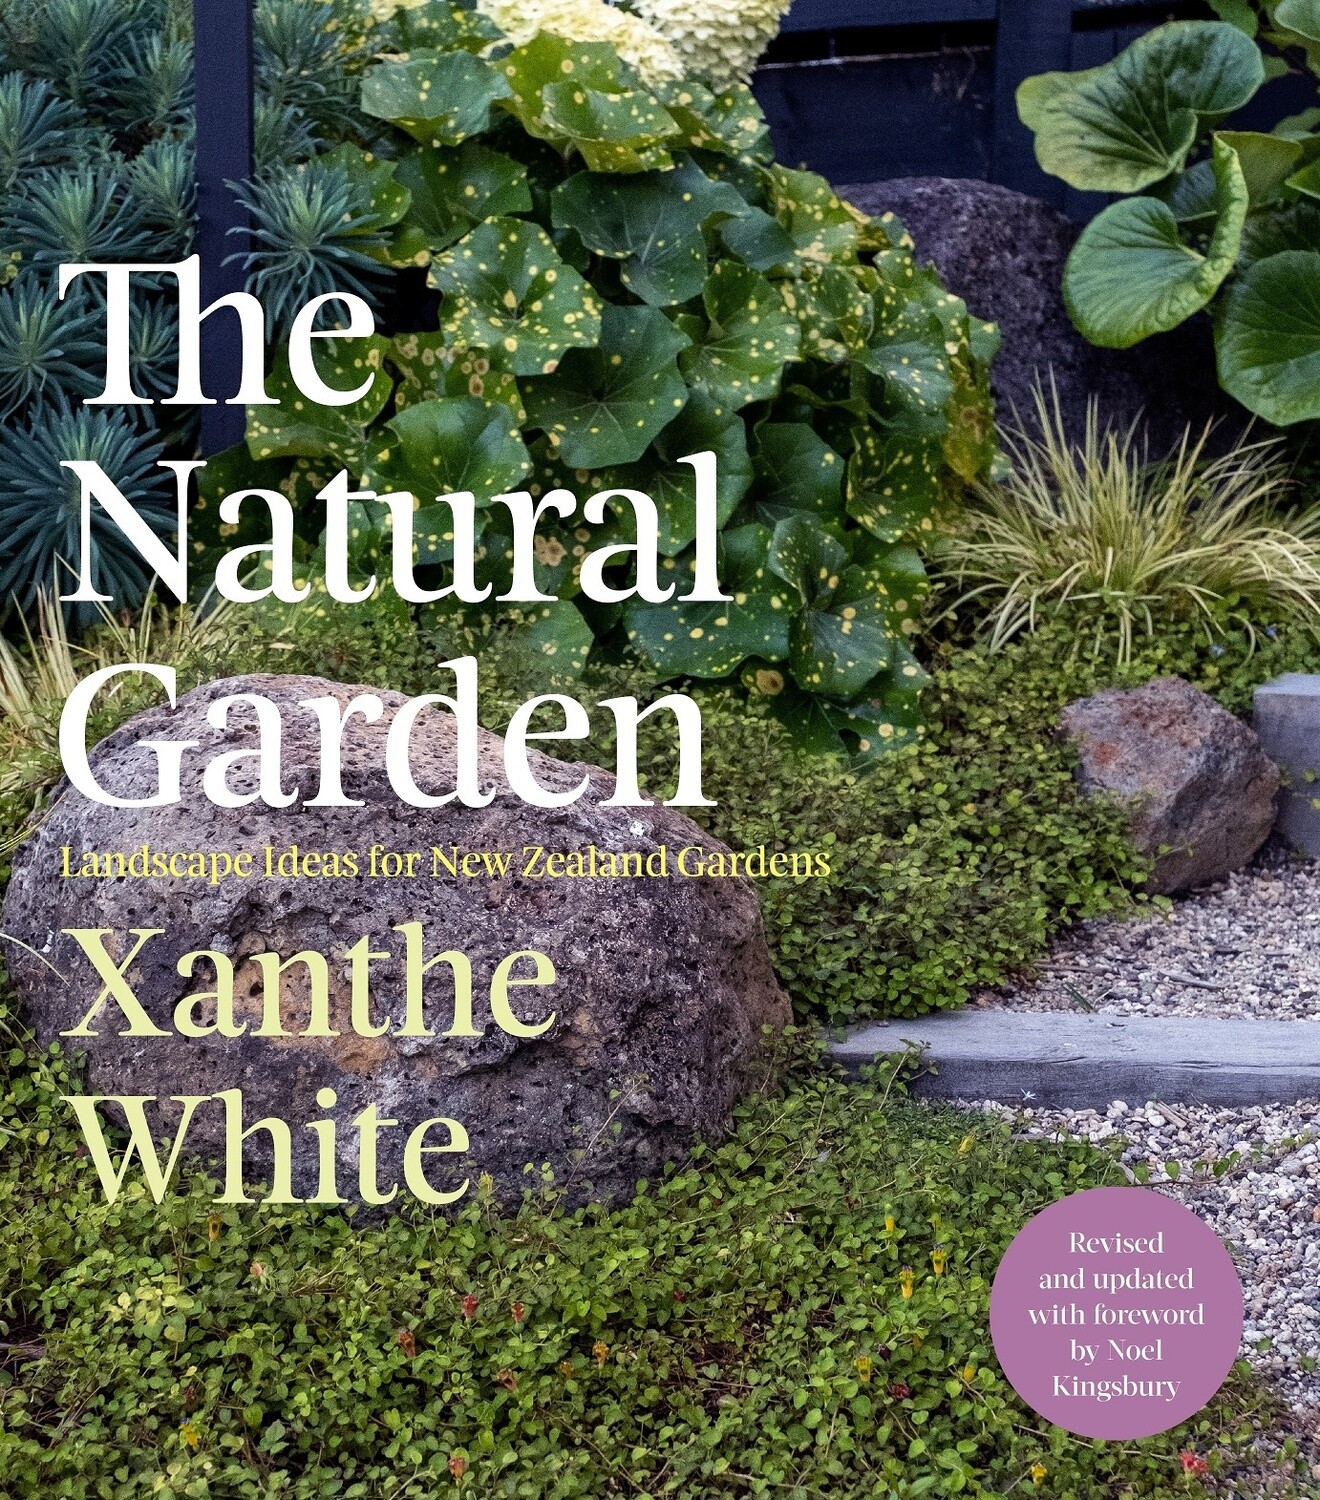 The Natural Garden: Landscape Ideas for New Zealand Gardens by Xanthe White